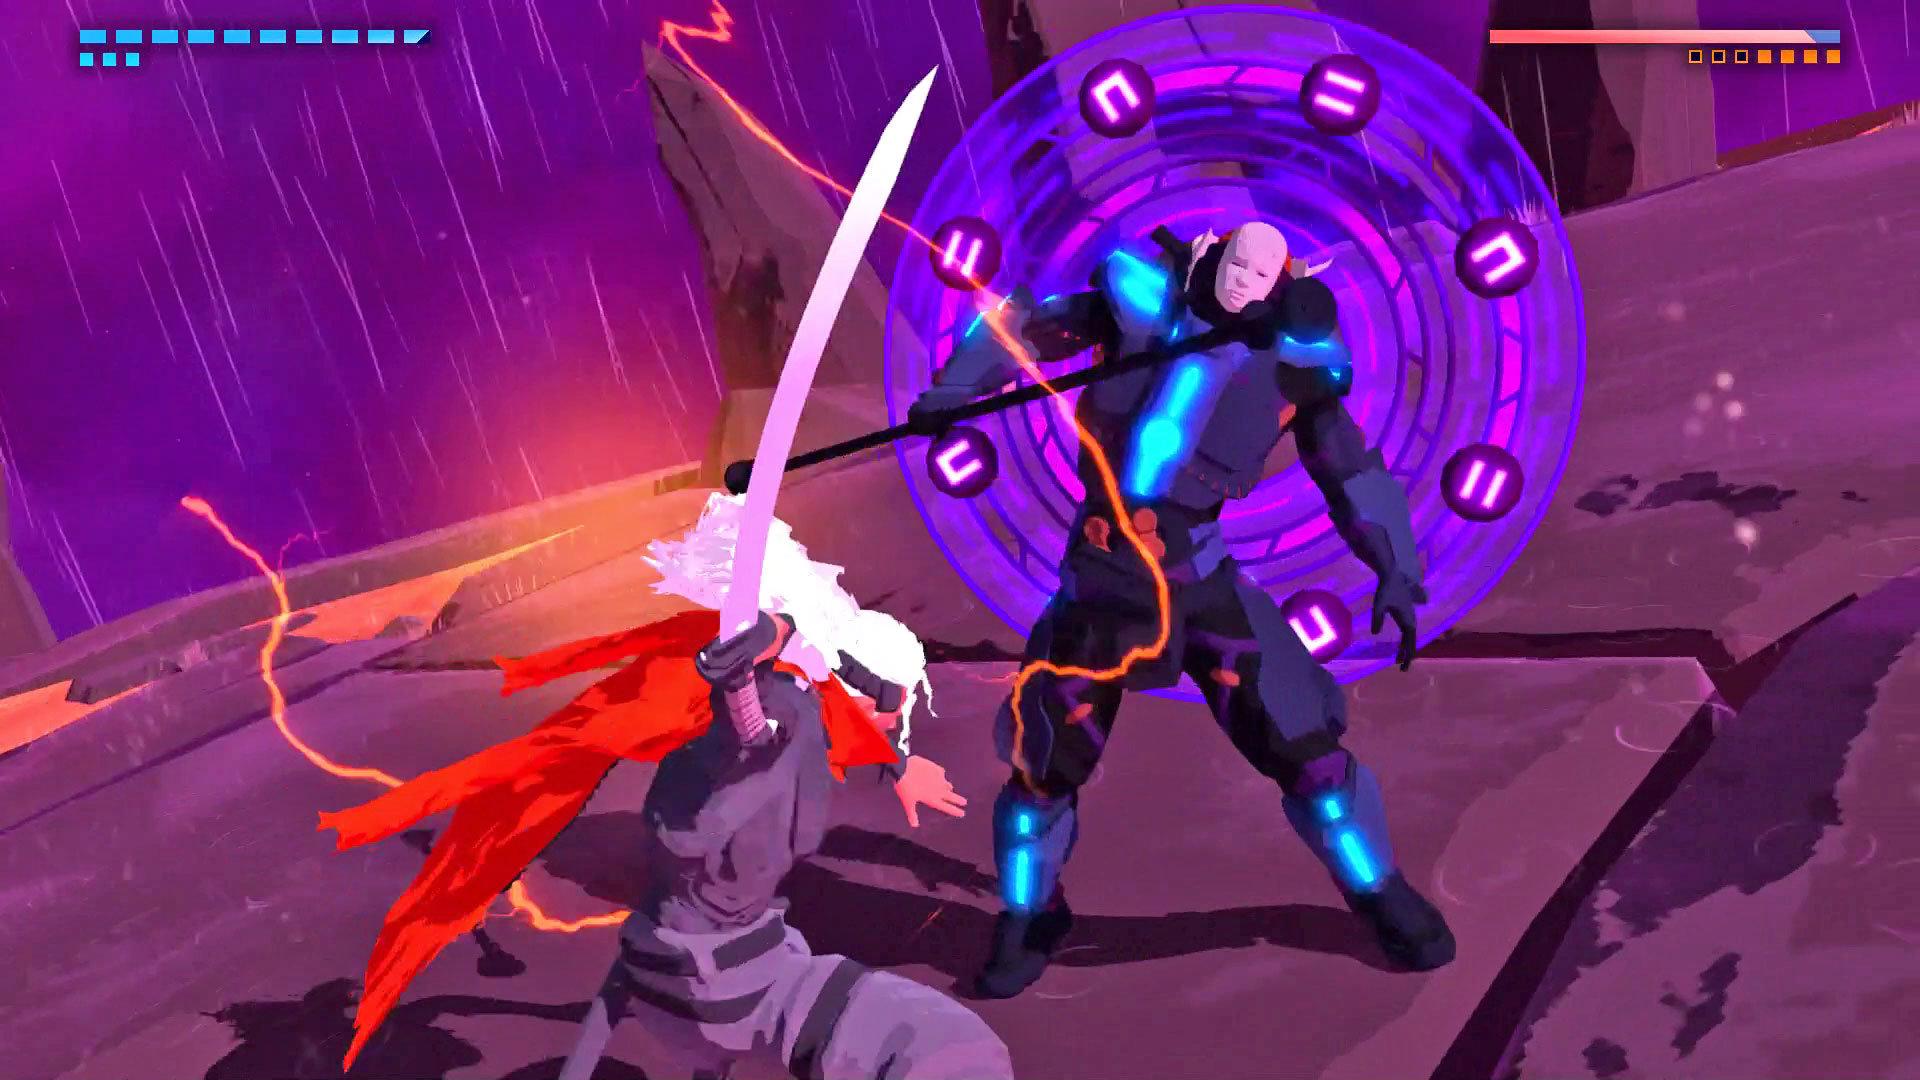 Furi' unleashes nothing but boss battles on PS4 and Steam